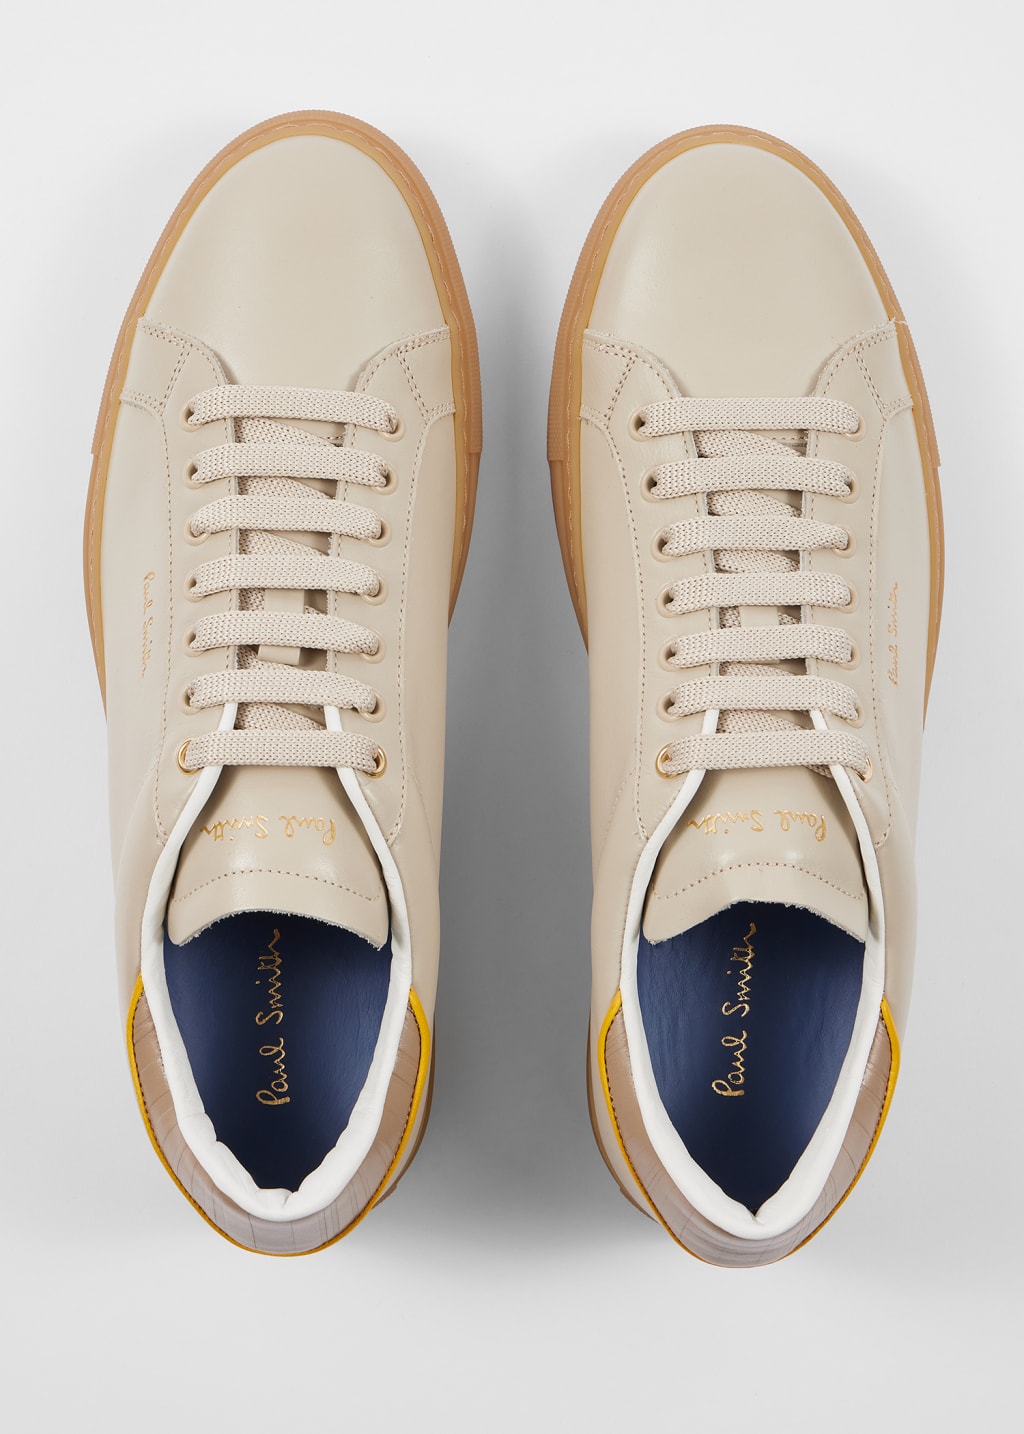 Pair View - Stone Leather 'Beck' Trainers Paul Smith